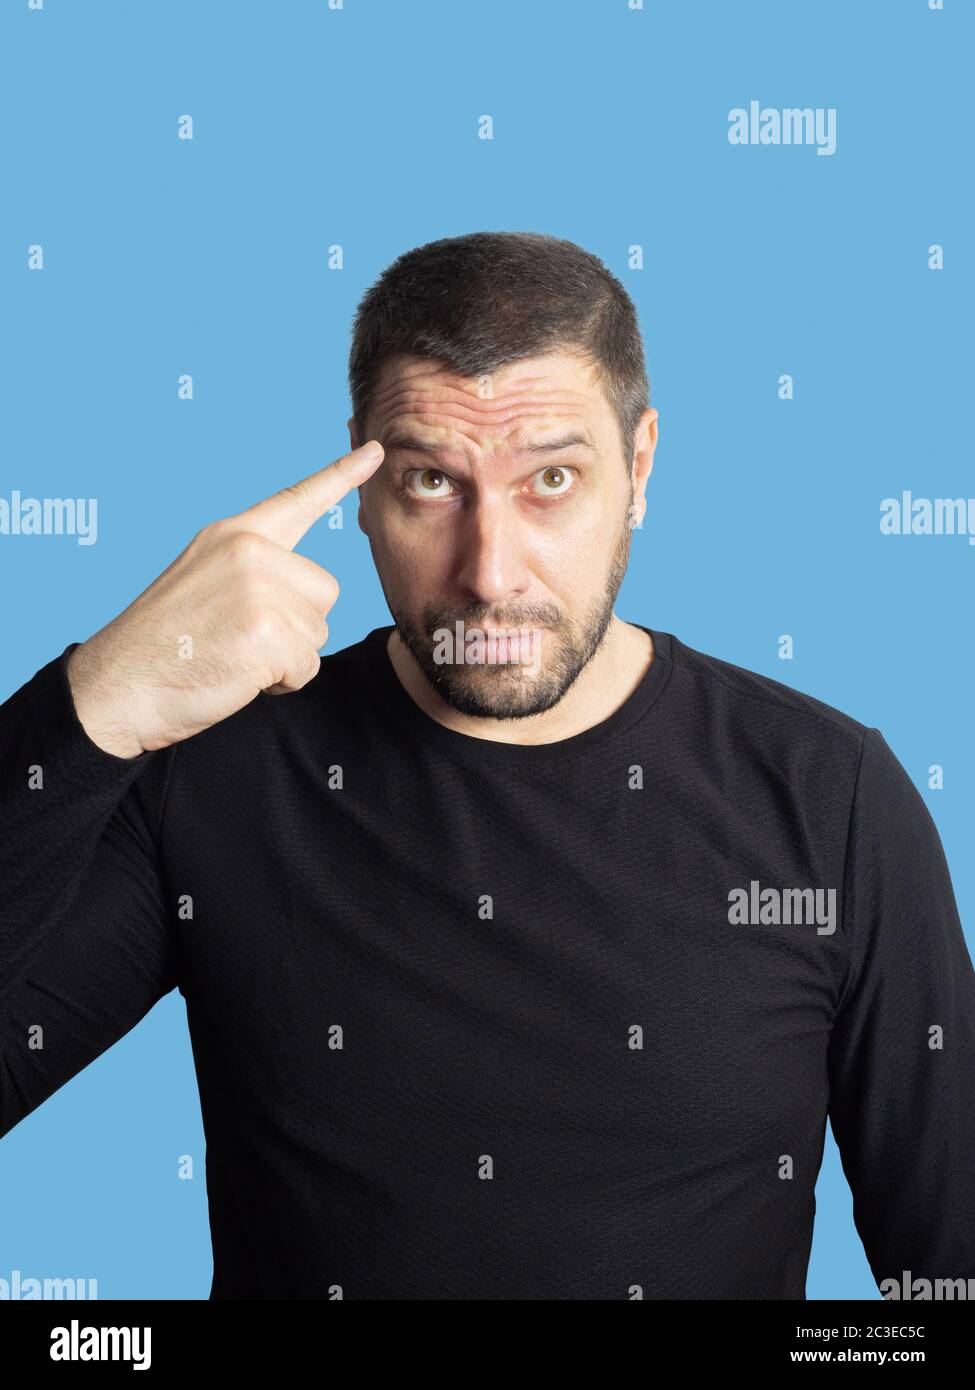 An unshaven man with brown eyes in a black sweatshirt looks up and points a finger at his forehead with wrinkles Stock Photo